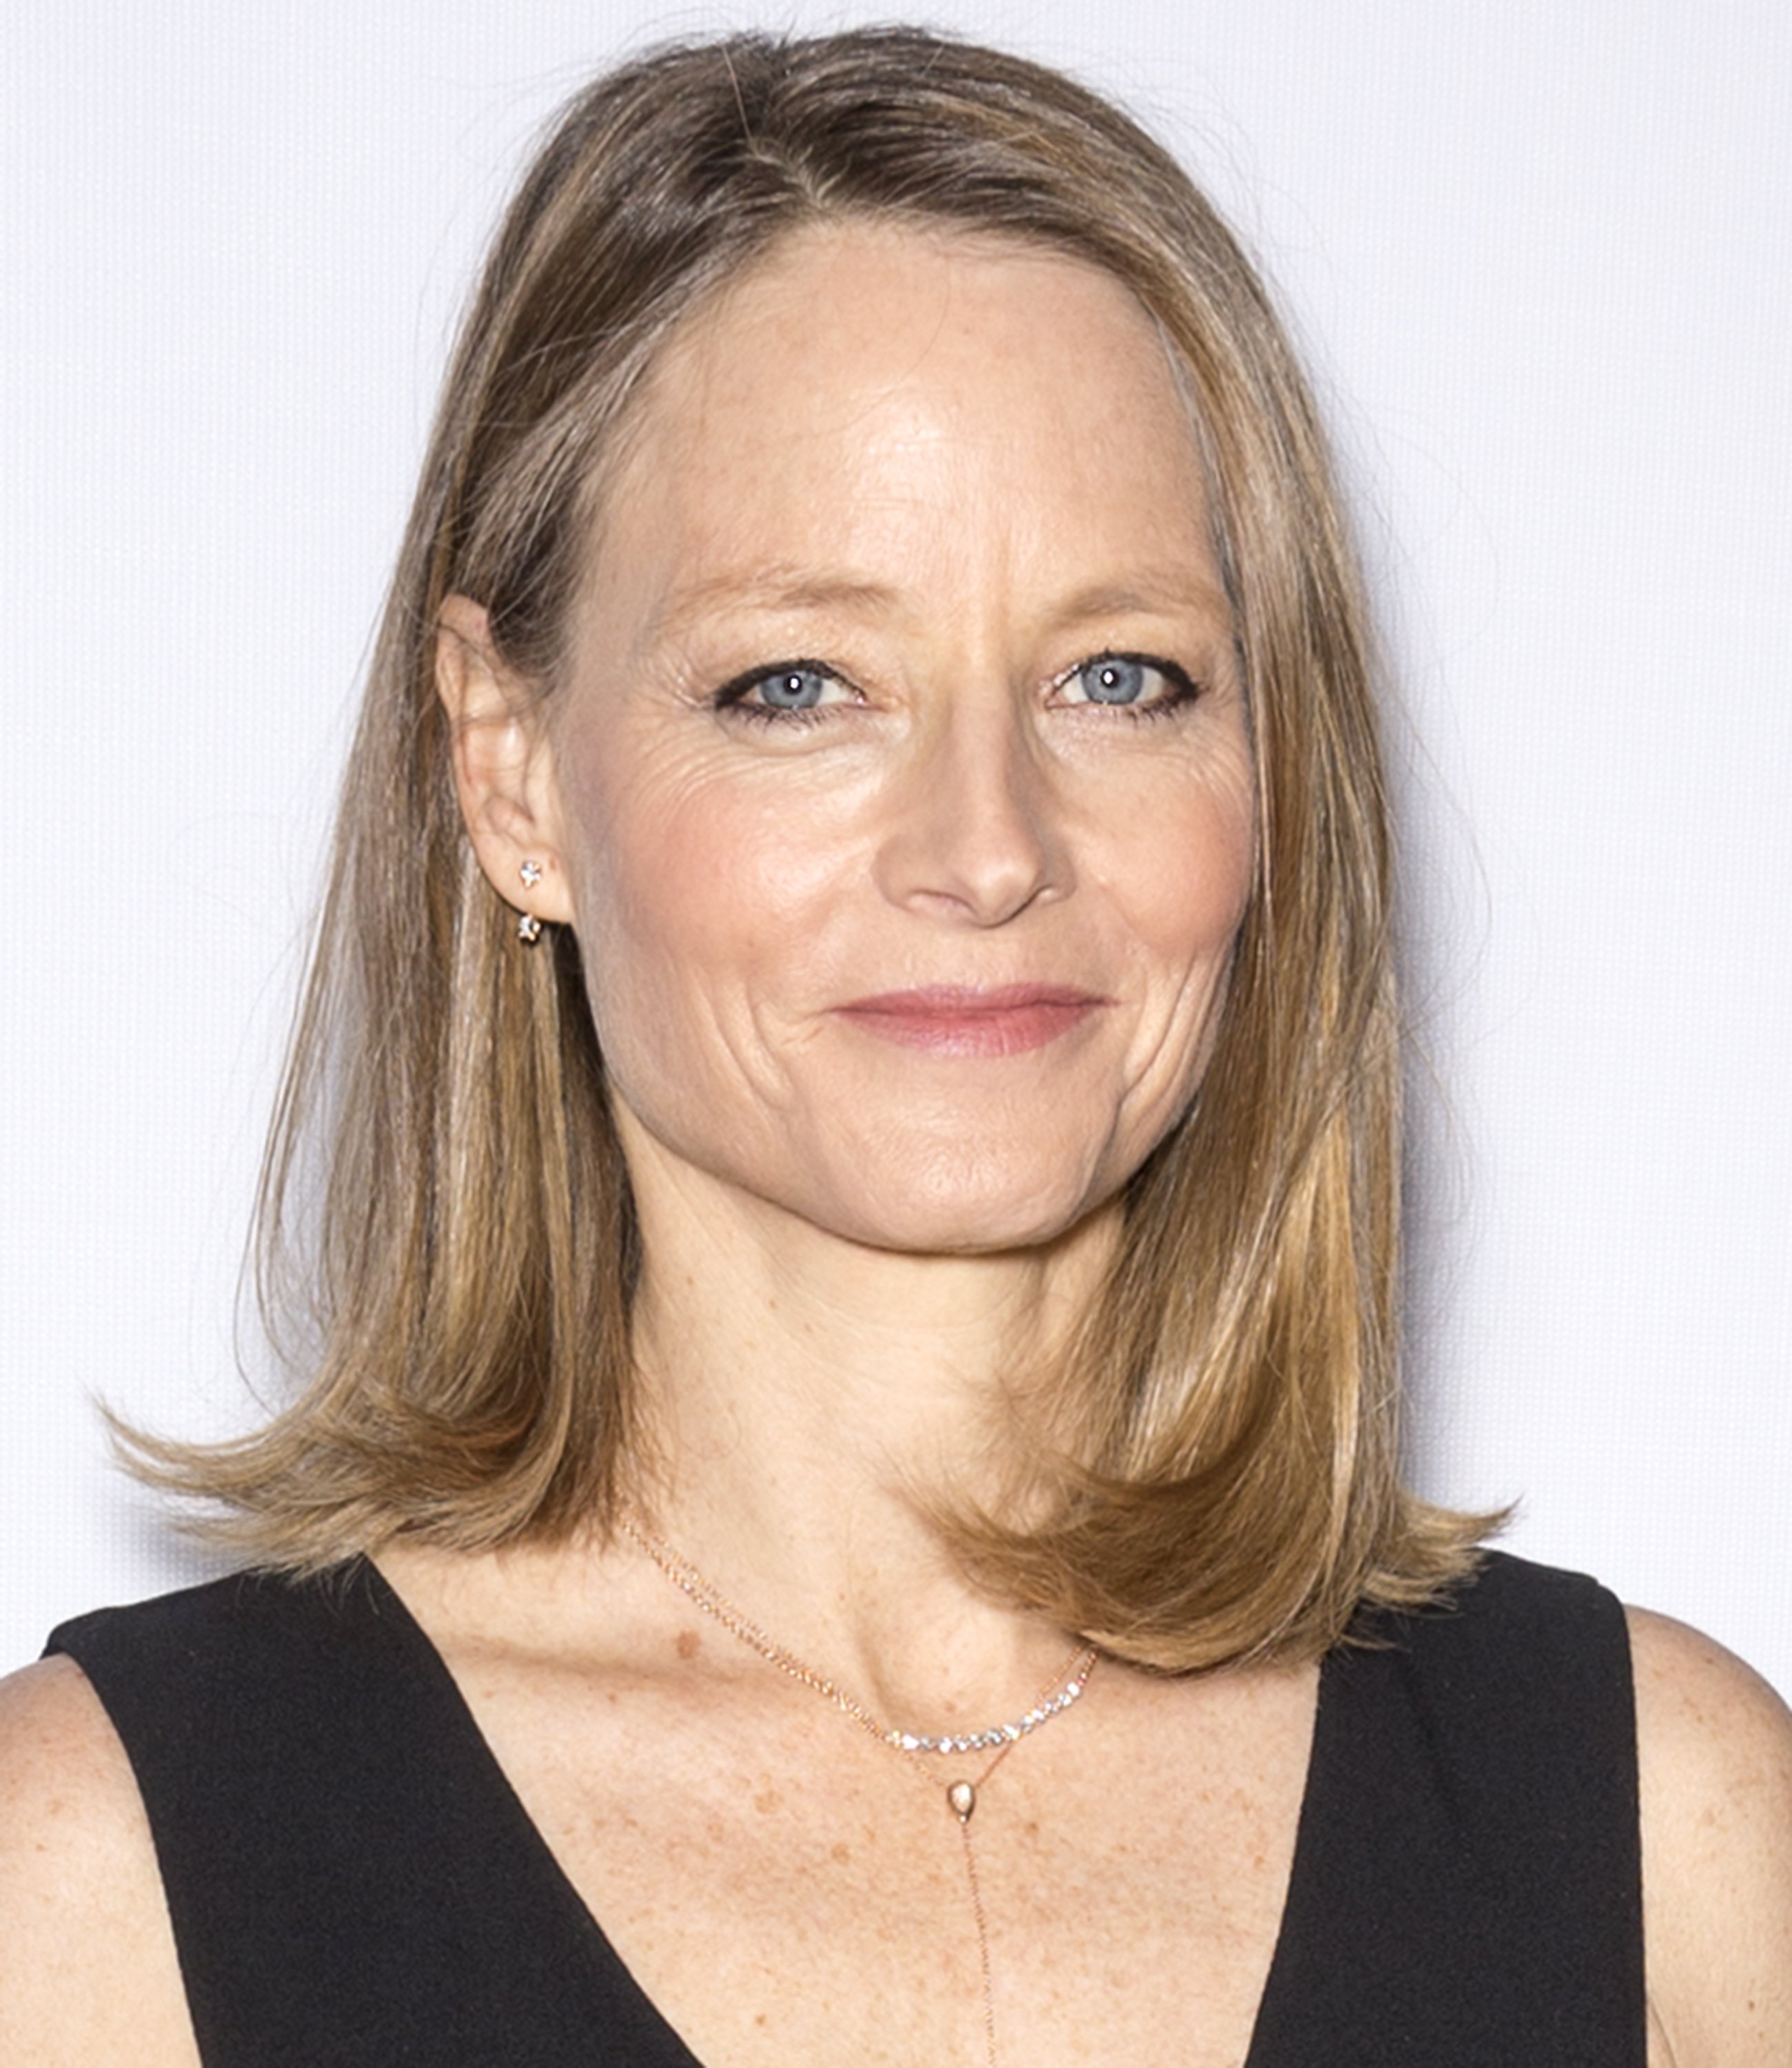 Jodie Foster at the "Hotel Artemis" premiere in Hollywood, May 2018. | Photo: Shutterstock.